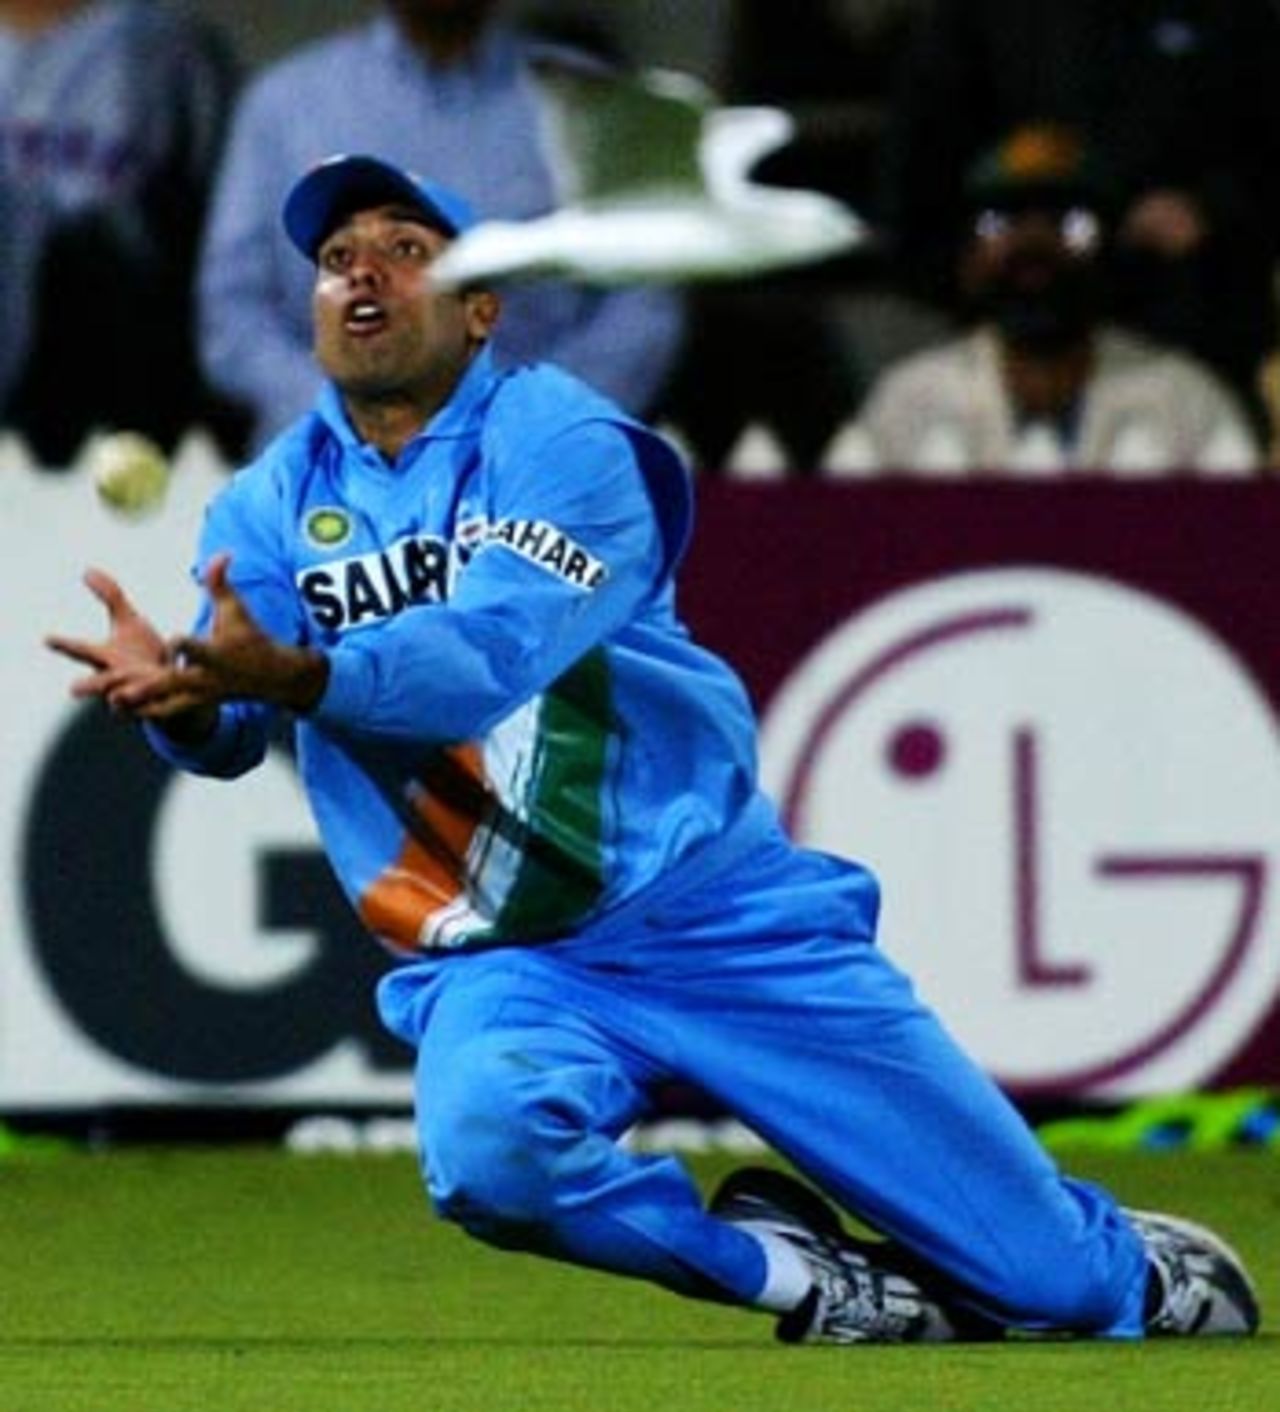 VVS Laxman took a blinder to get rid of Andy Blignaut and the wheels came off for Zimbabwe, India v Zimbabwe, VB Series, 8th ODI, Adelaide, January 24, 2004